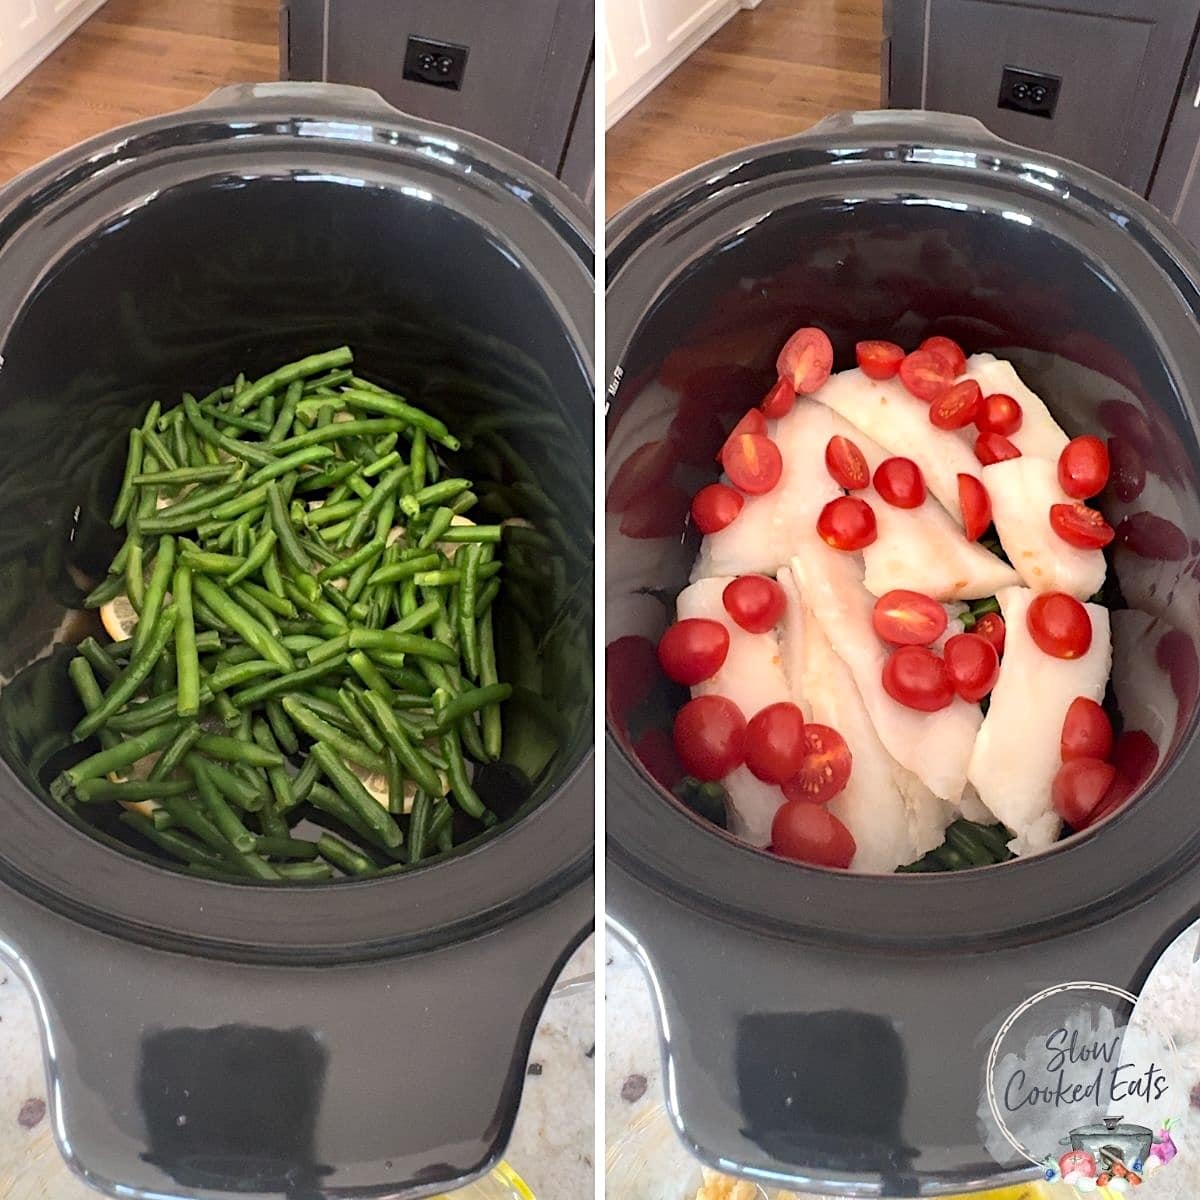 Layering the lemons, slices, green beans, cod, and tomatoes in the slow cooker.